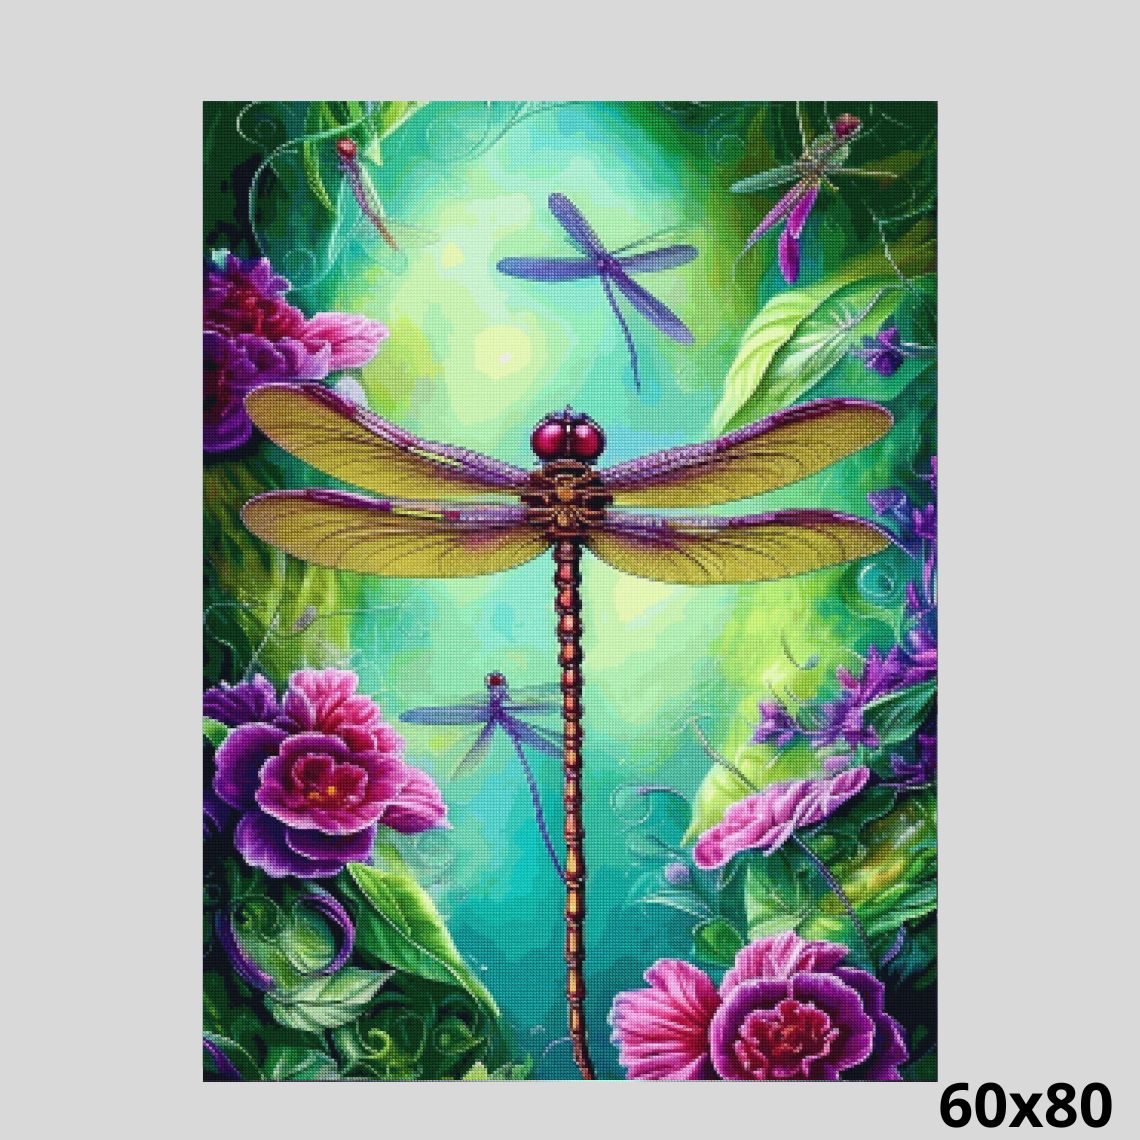 Dragonfly Dreams 60x80 Paint with Diamonds